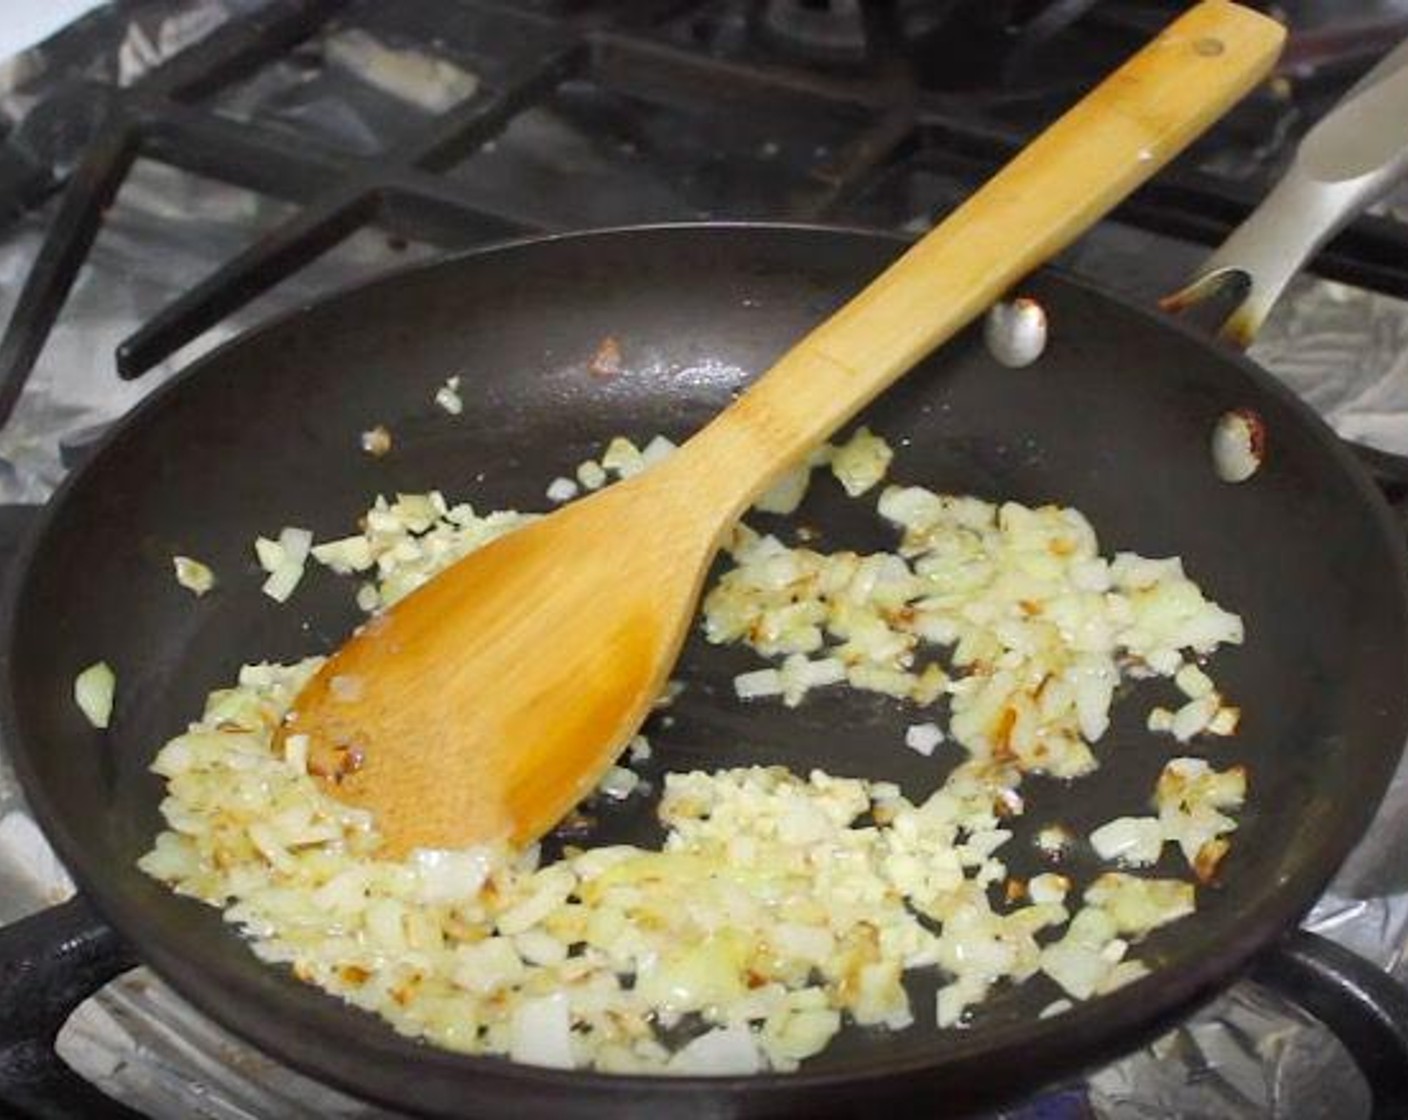 step 1 In a frying pan, heat Cooking Oil (1 Tbsp) and Butter (1 Tbsp). Add Onion (1) and saute for 5-7 minutes, until onions are soft and golden brown. Season with Salt (to taste) and Ground Black Pepper (to taste).